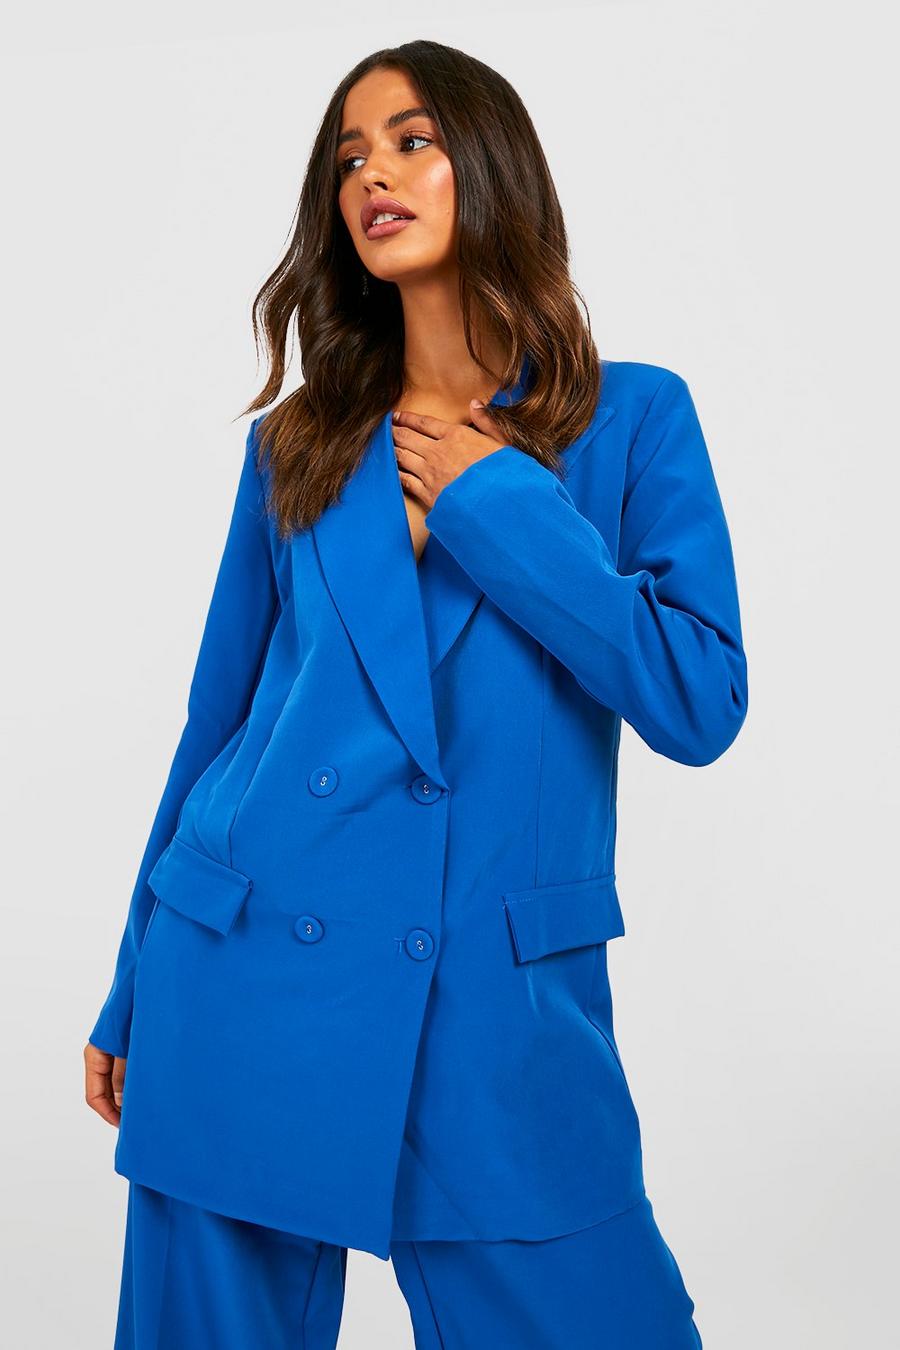 Cobalt blue Tailored Double Breasted Oversized Blazer